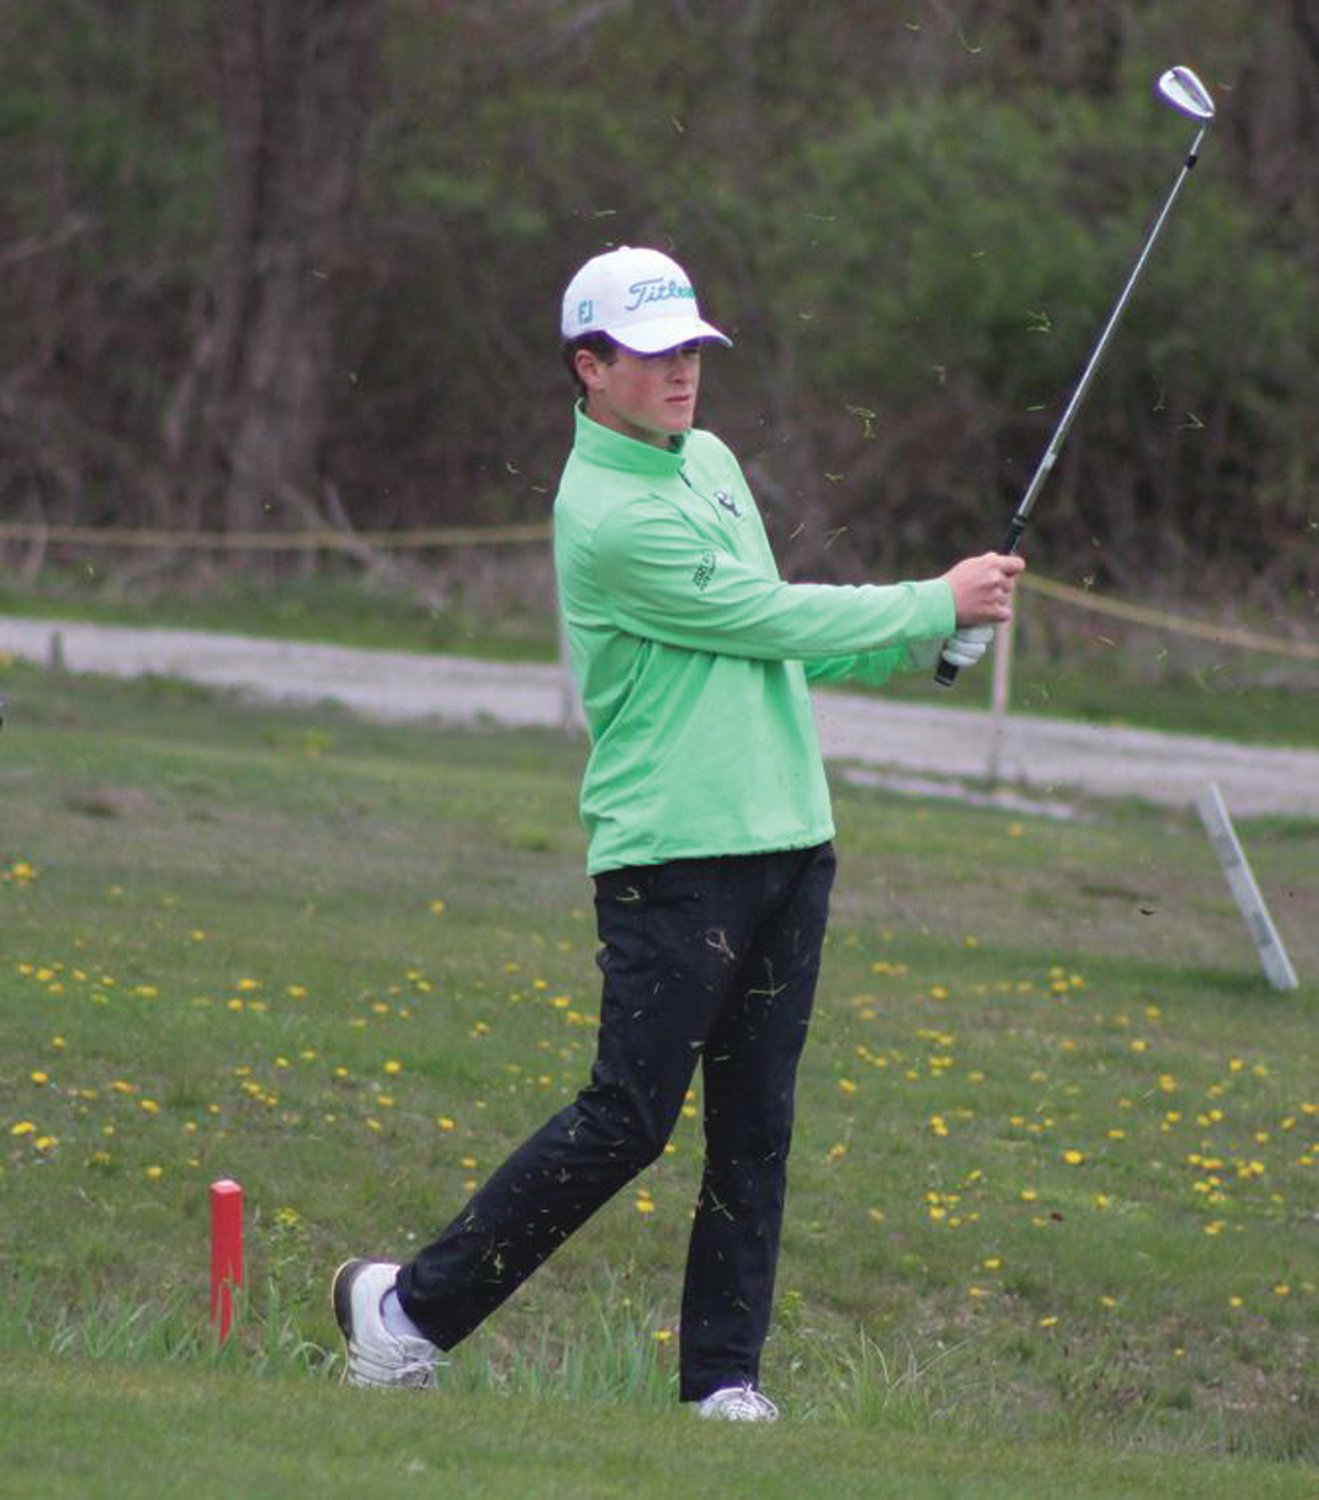 CHAMPIONSHIP READY: Bishop Hendricken’s Gianni Fontenault watches a shot down the fairway in a match earlier this spring.